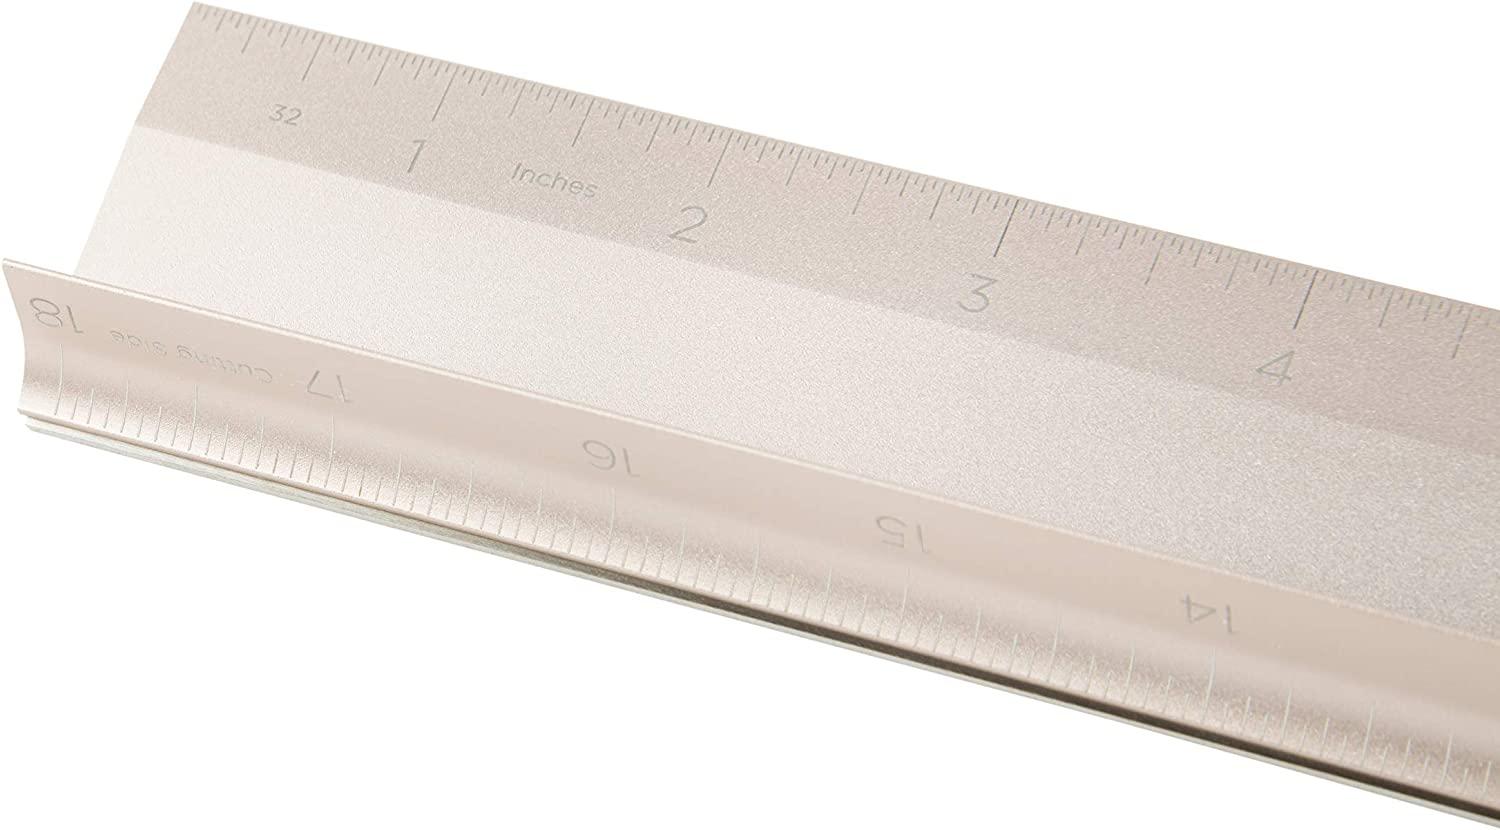 Cricut Metal Ruler - Safety Cutting Ruler for Use with Rotary Cutters,  Cricut TrueControl knife, Xacto knife - Great For Quilting, Scrapbooking,  Crafting and Paper Cutting - 18, Rose